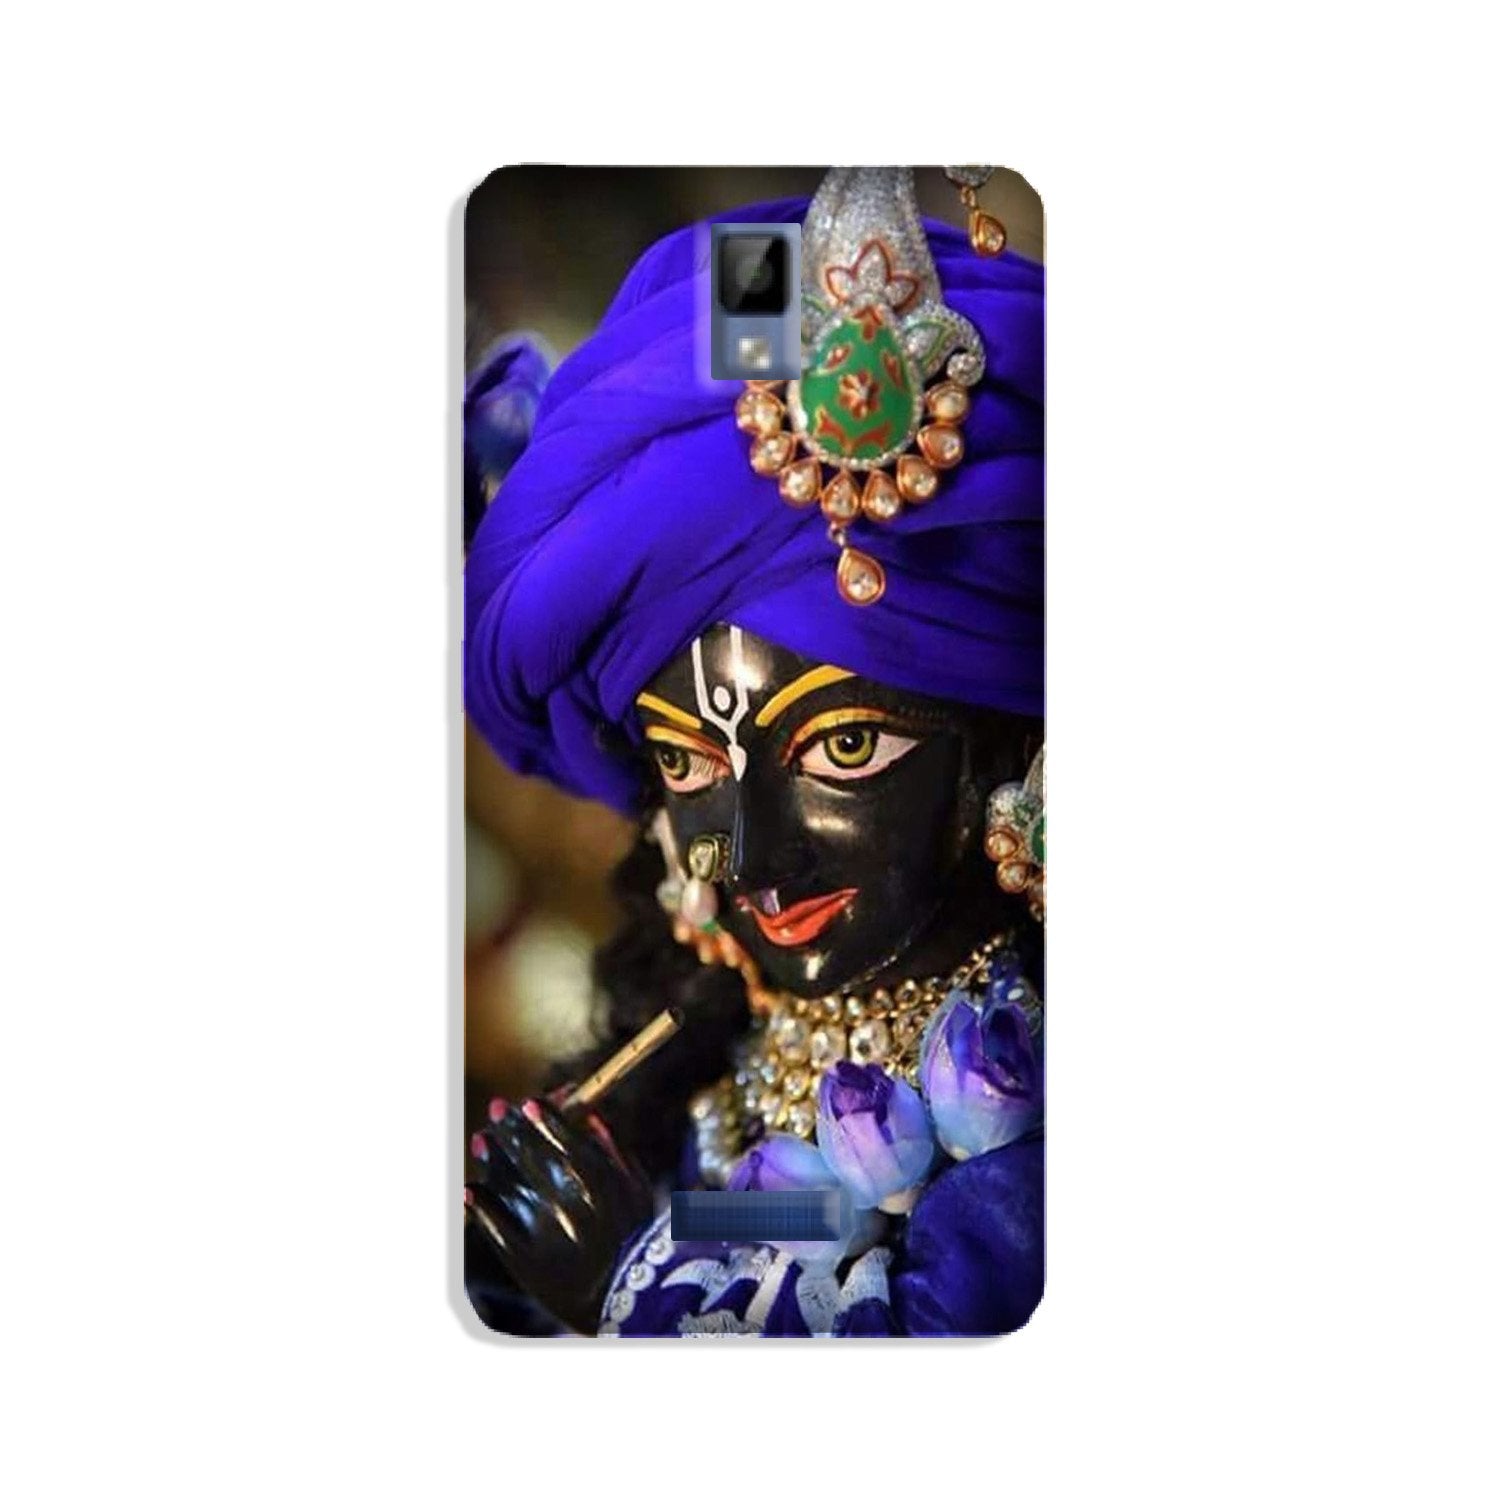 Lord Krishna4 Case for Gionee P7